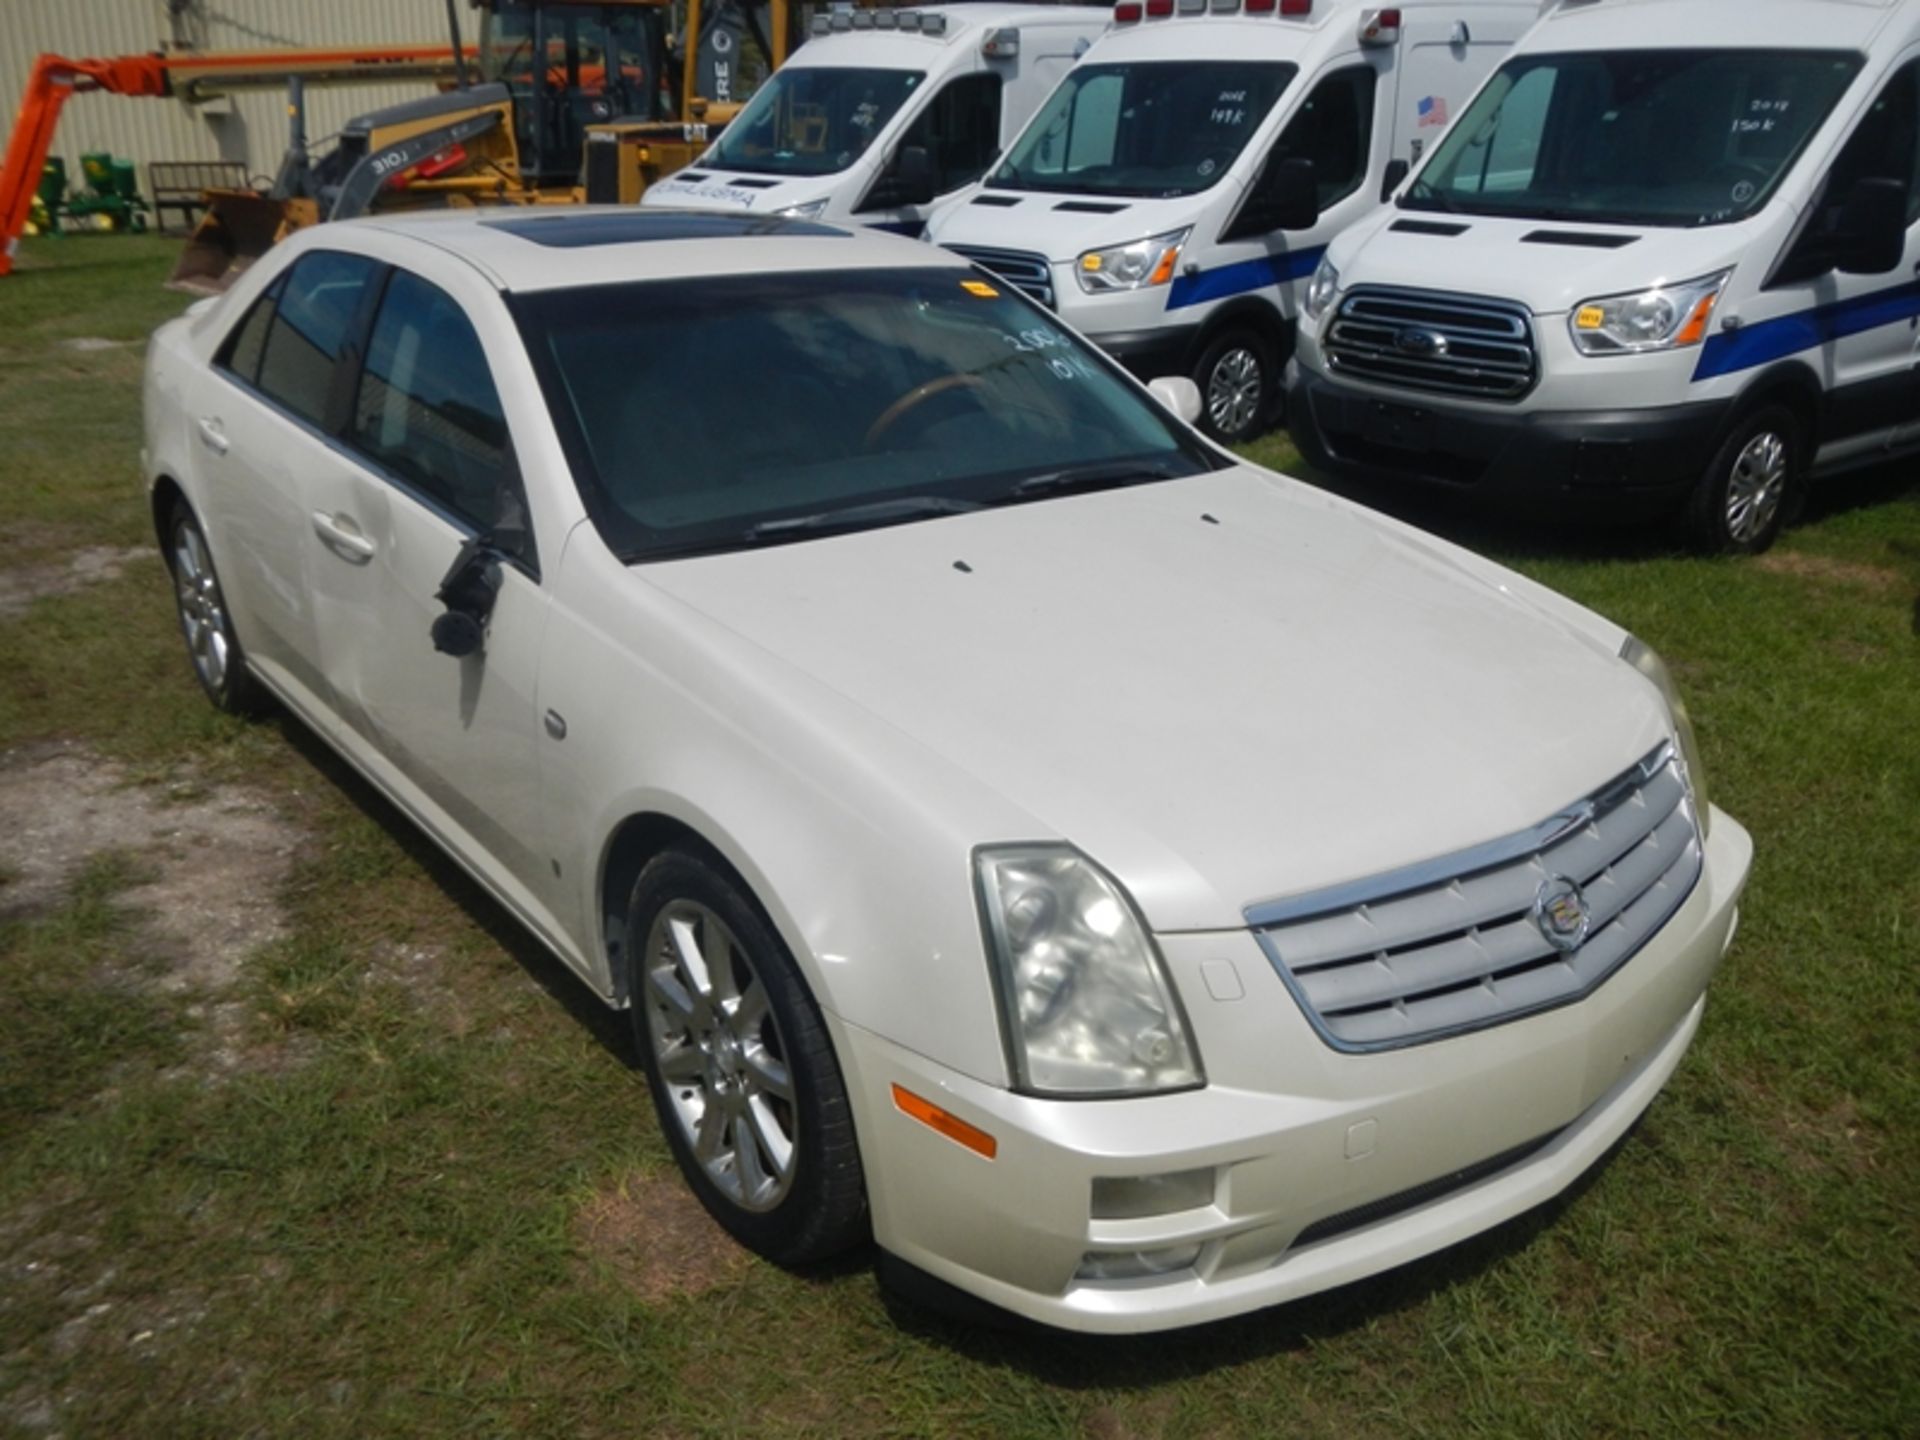 2006 CADILLAC DTS 4-door sedan wrecked wrecked on passenger side, 101,135 miles- 1G6DC67A360220772 - Image 2 of 8